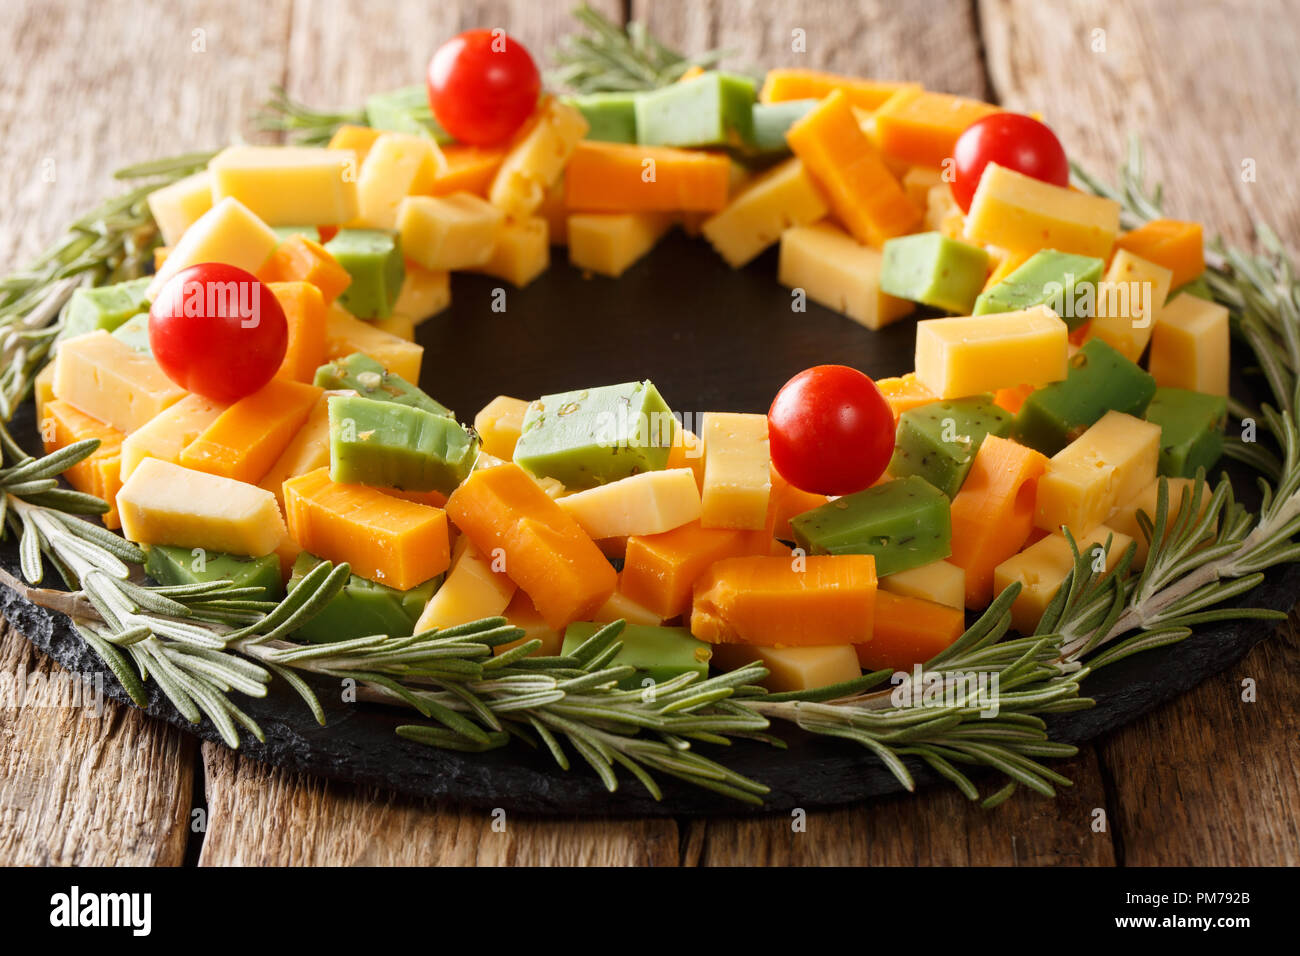 delicious Christmas set of pesto cheese, cheddar, mimolette with tomatoes and rosemary close-up on the table. horizontal Stock Photo